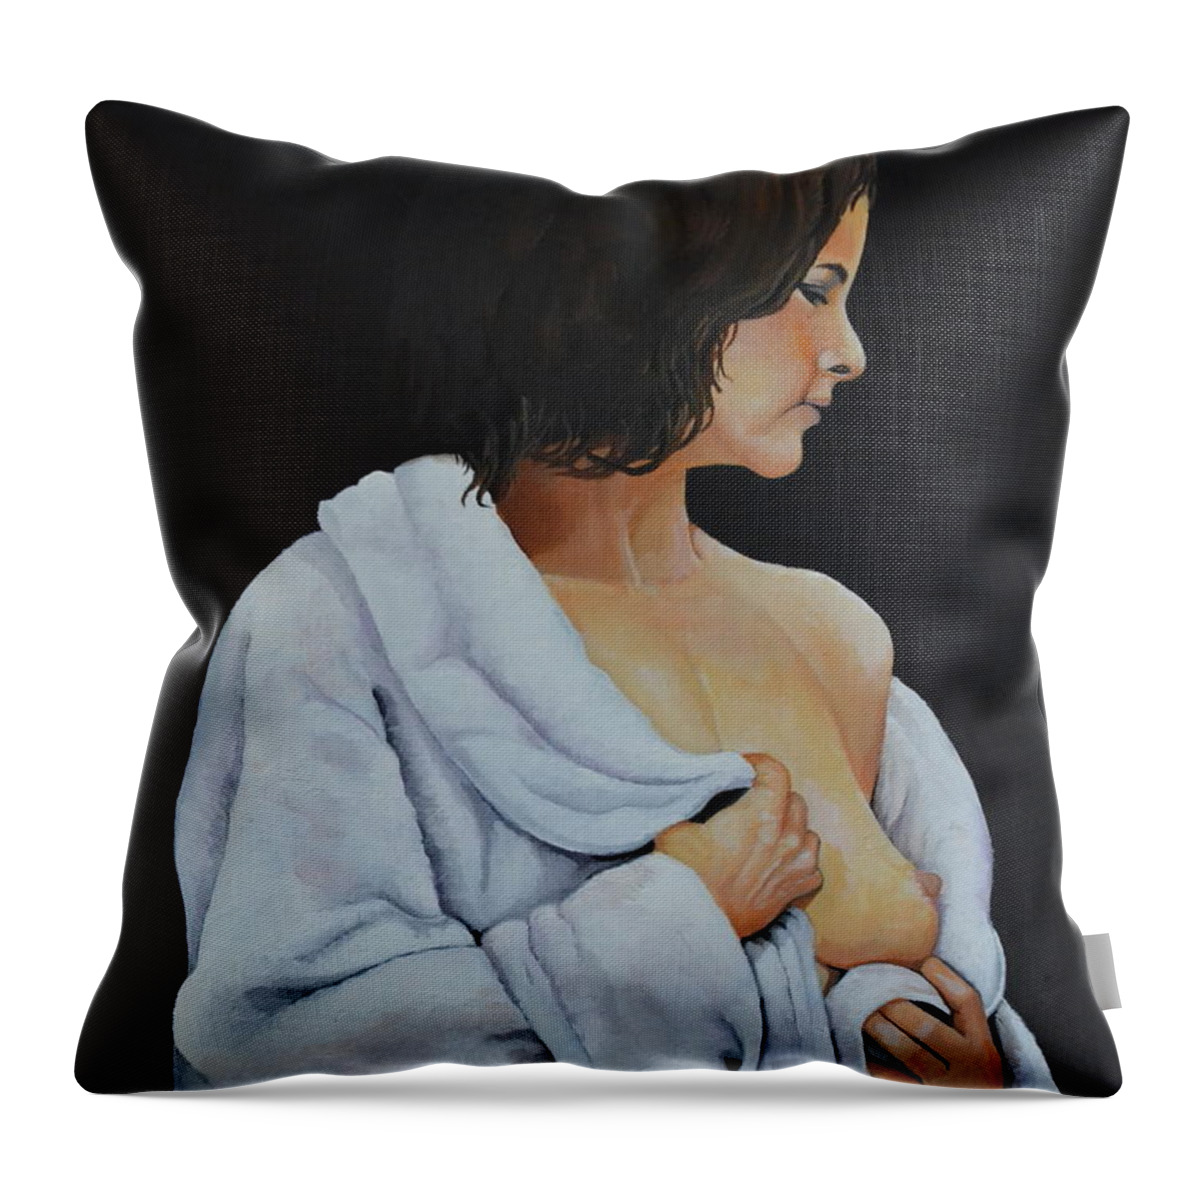  A Painting Of A Nude Female In A White Bath Robe. She Has Dark Hair And Is In The Process Of Taking Off Her Robe. Her Skin Tone Is Light In Color And The Expression On Her Face Is Peaceful. Throw Pillow featuring the painting White Robe by Martin Schmidt